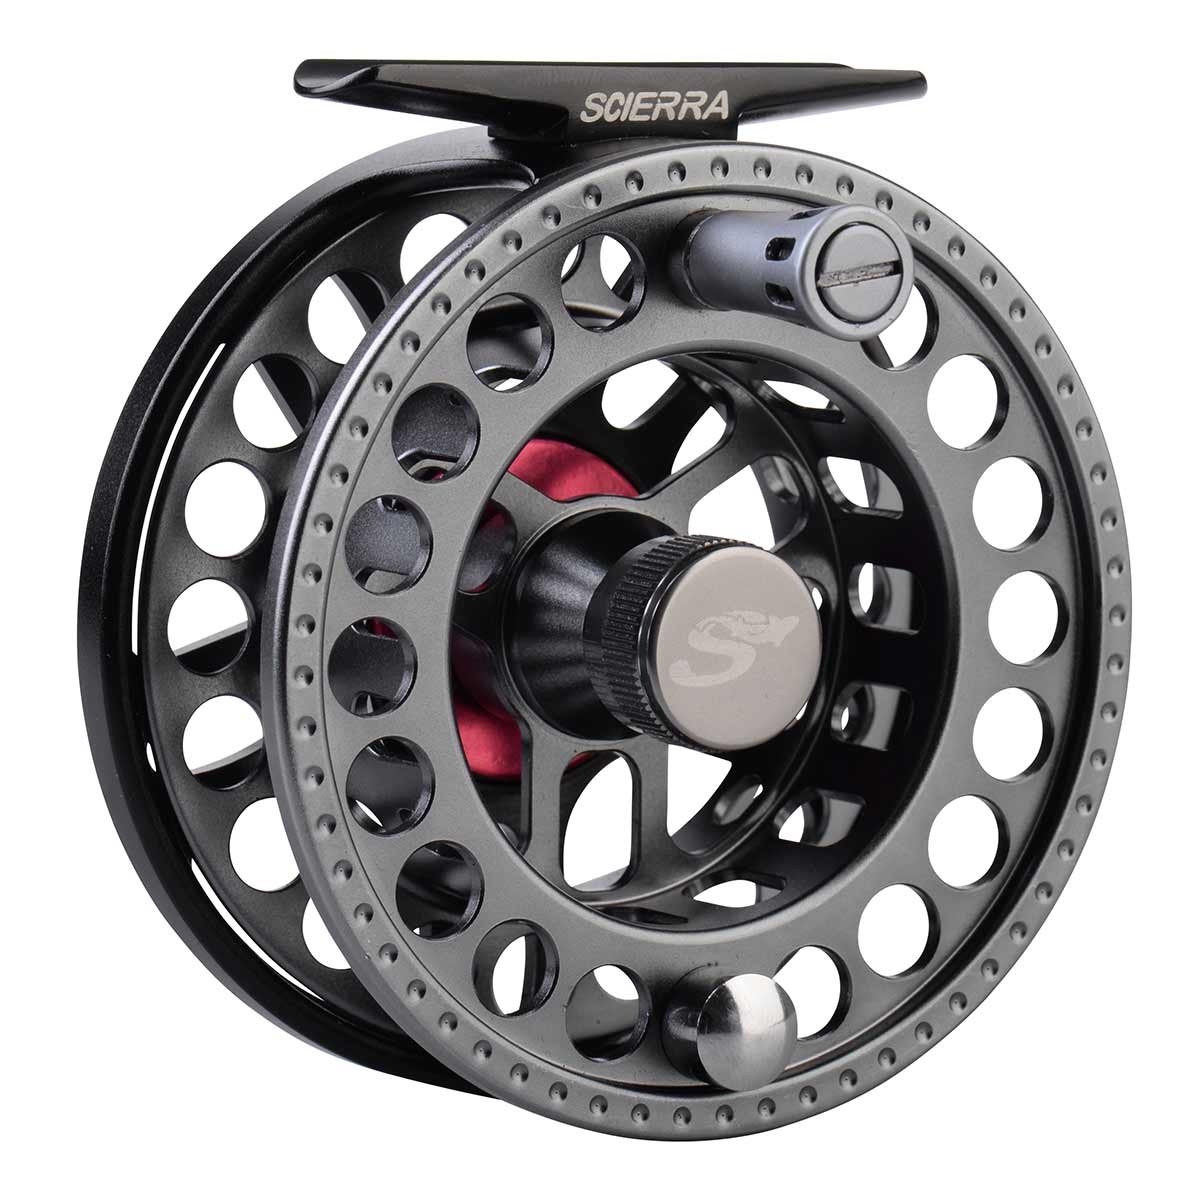 Scierra SRX Fly Reel - Fly Fishing Reels for Trout and Salmon